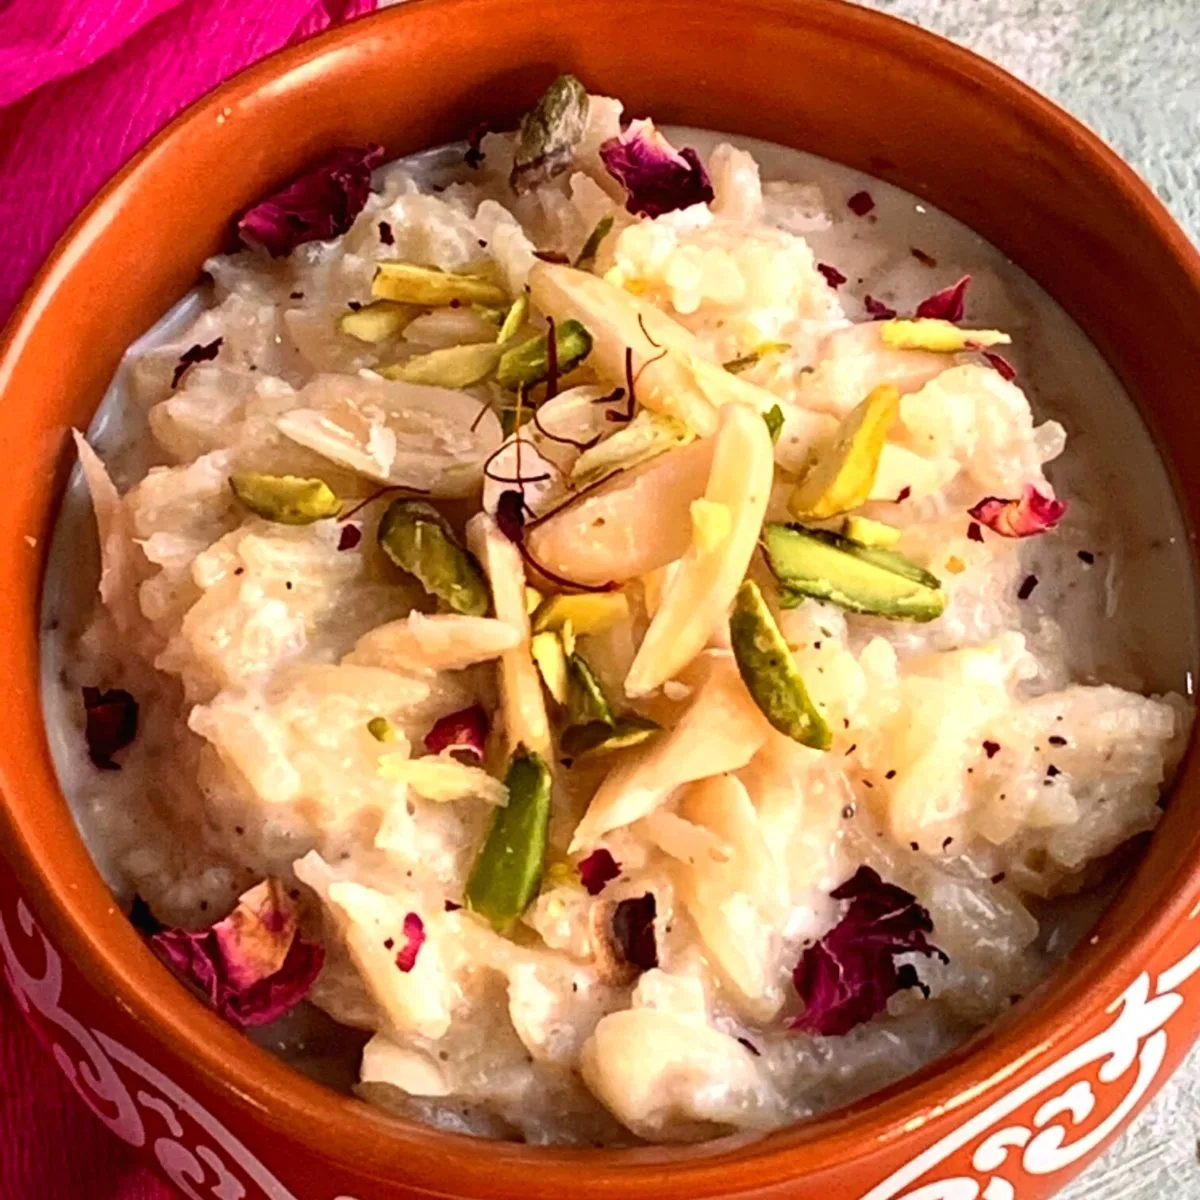 Rich and creamy Rice Kheer or Indian Rice pudding is one of the quintessential Indian desserts made using Rice, Milk and Sugar.